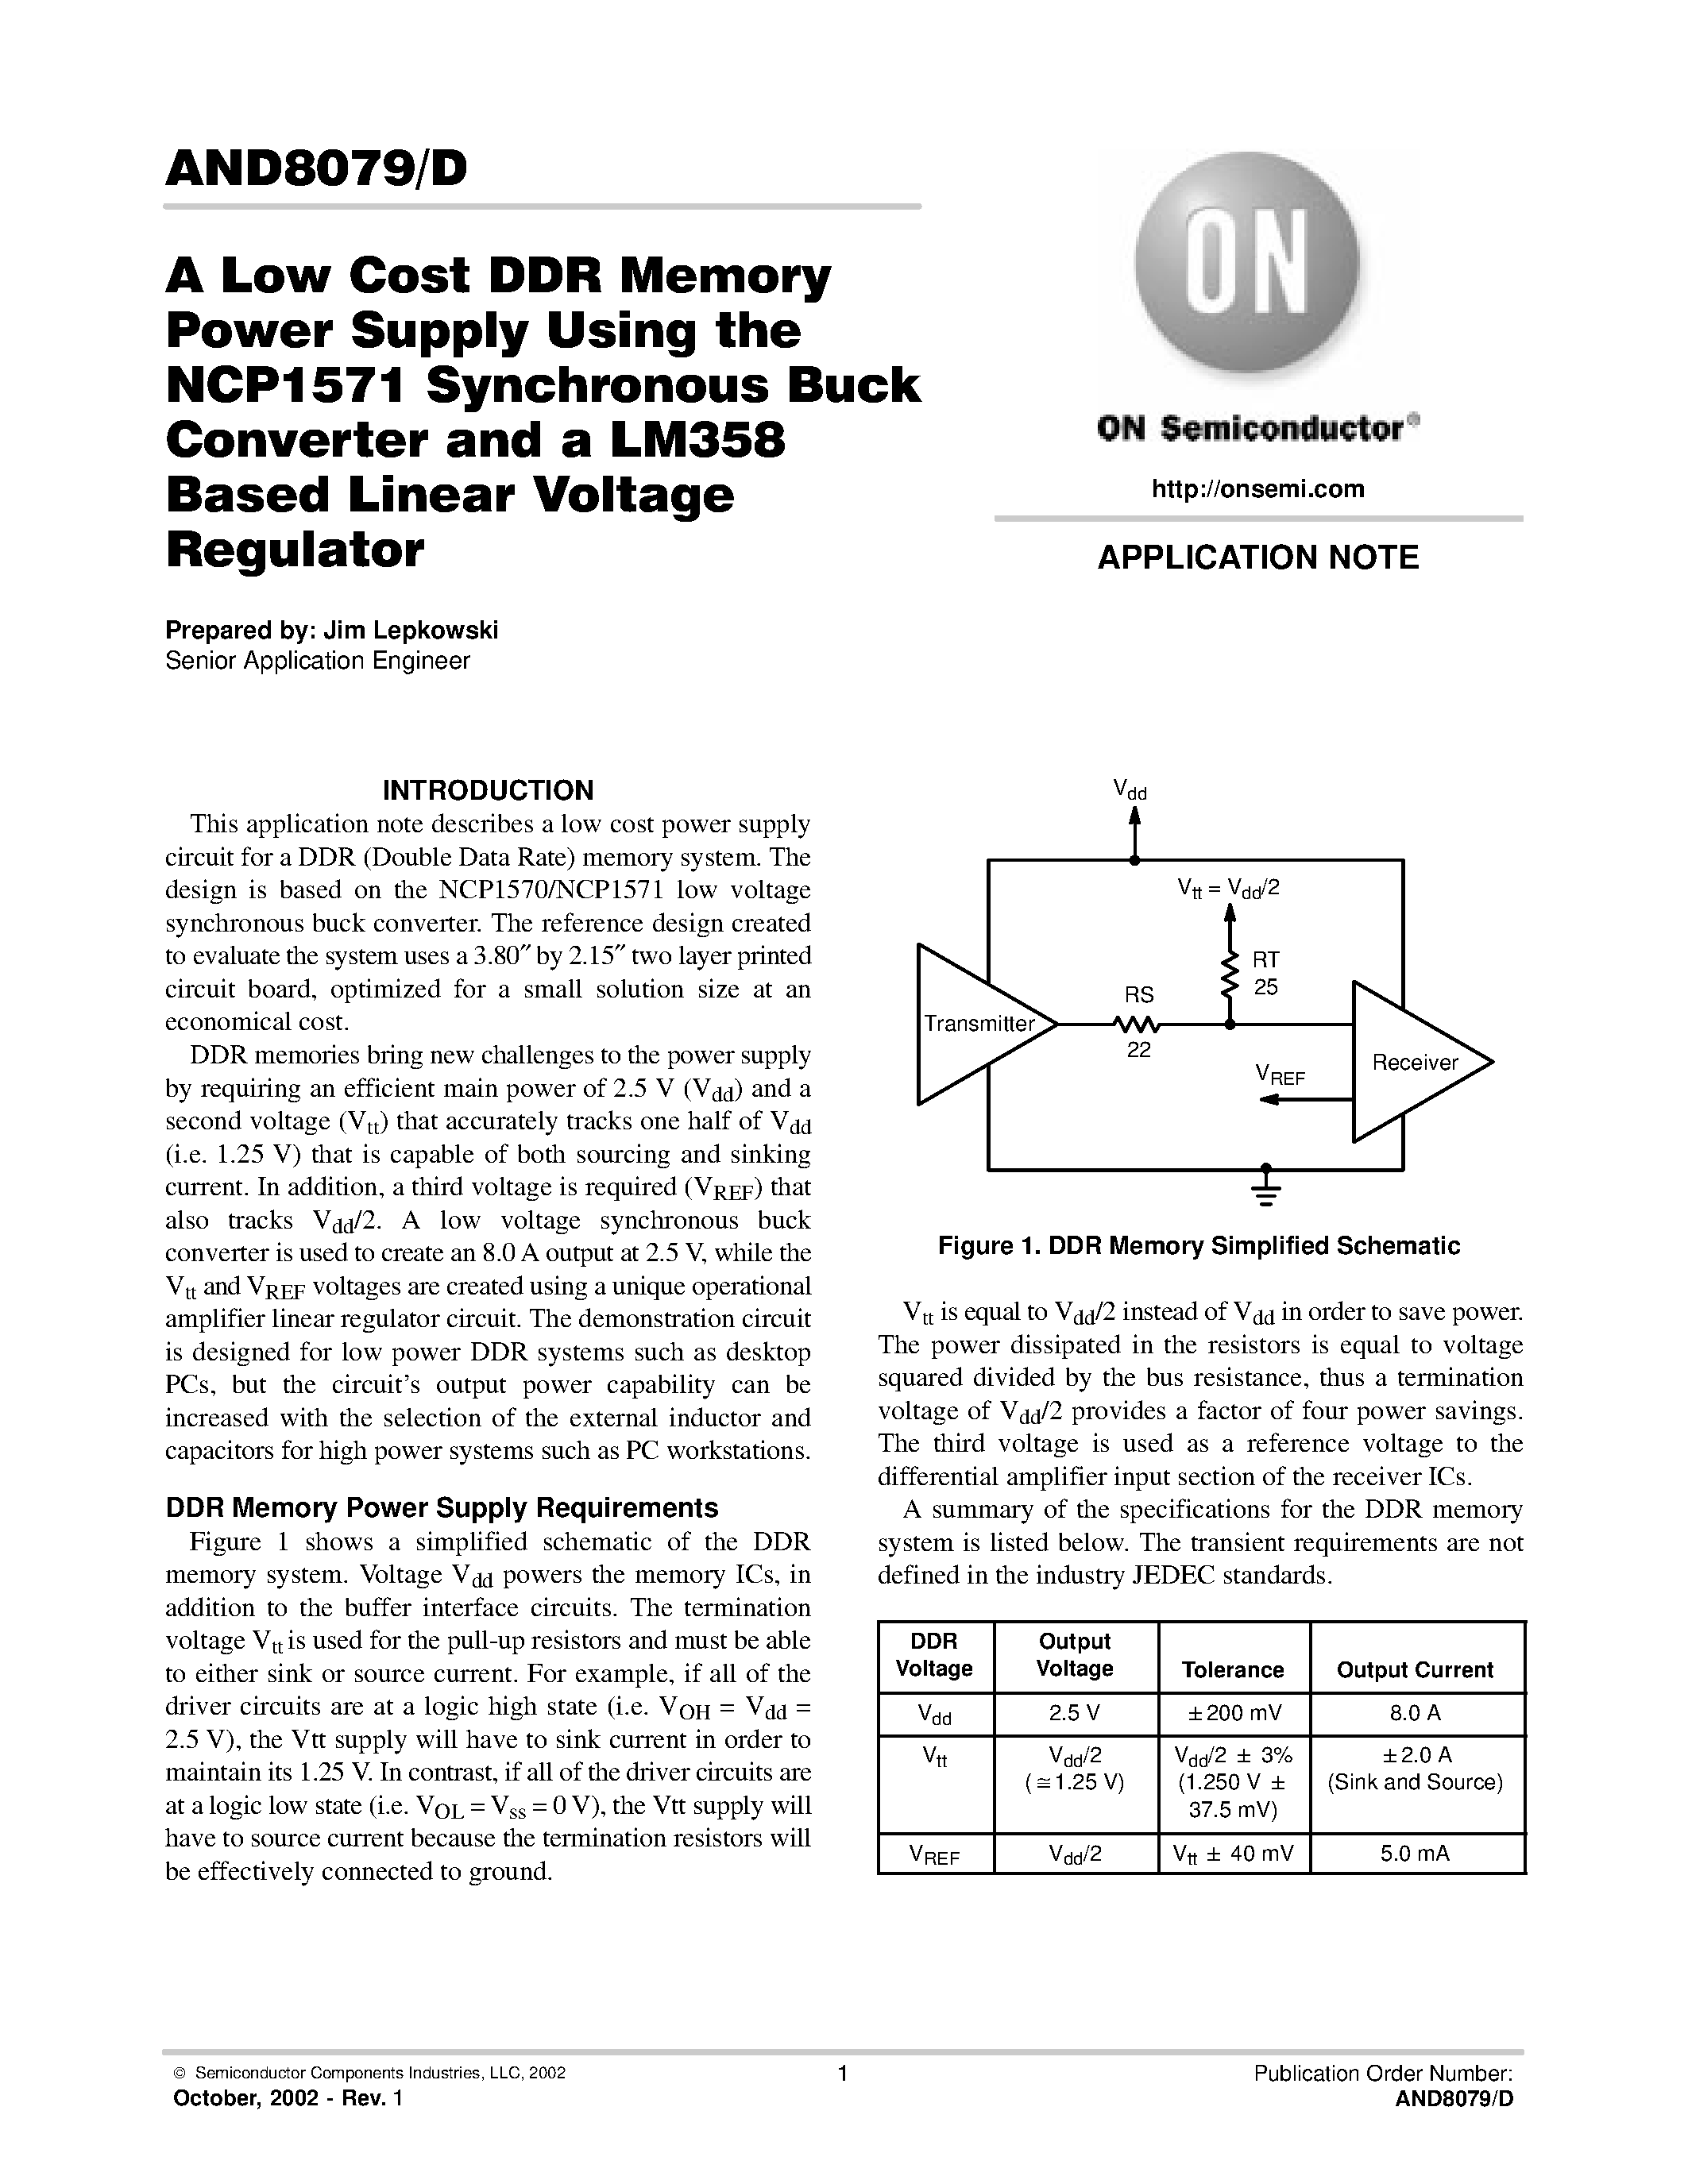 Даташит AND8079 - A Low Cost DDR Memory Power Supply Using the NCP1571 Synchronous Buck Converter and a LM358 Based Linear Voltage Regulator страница 1